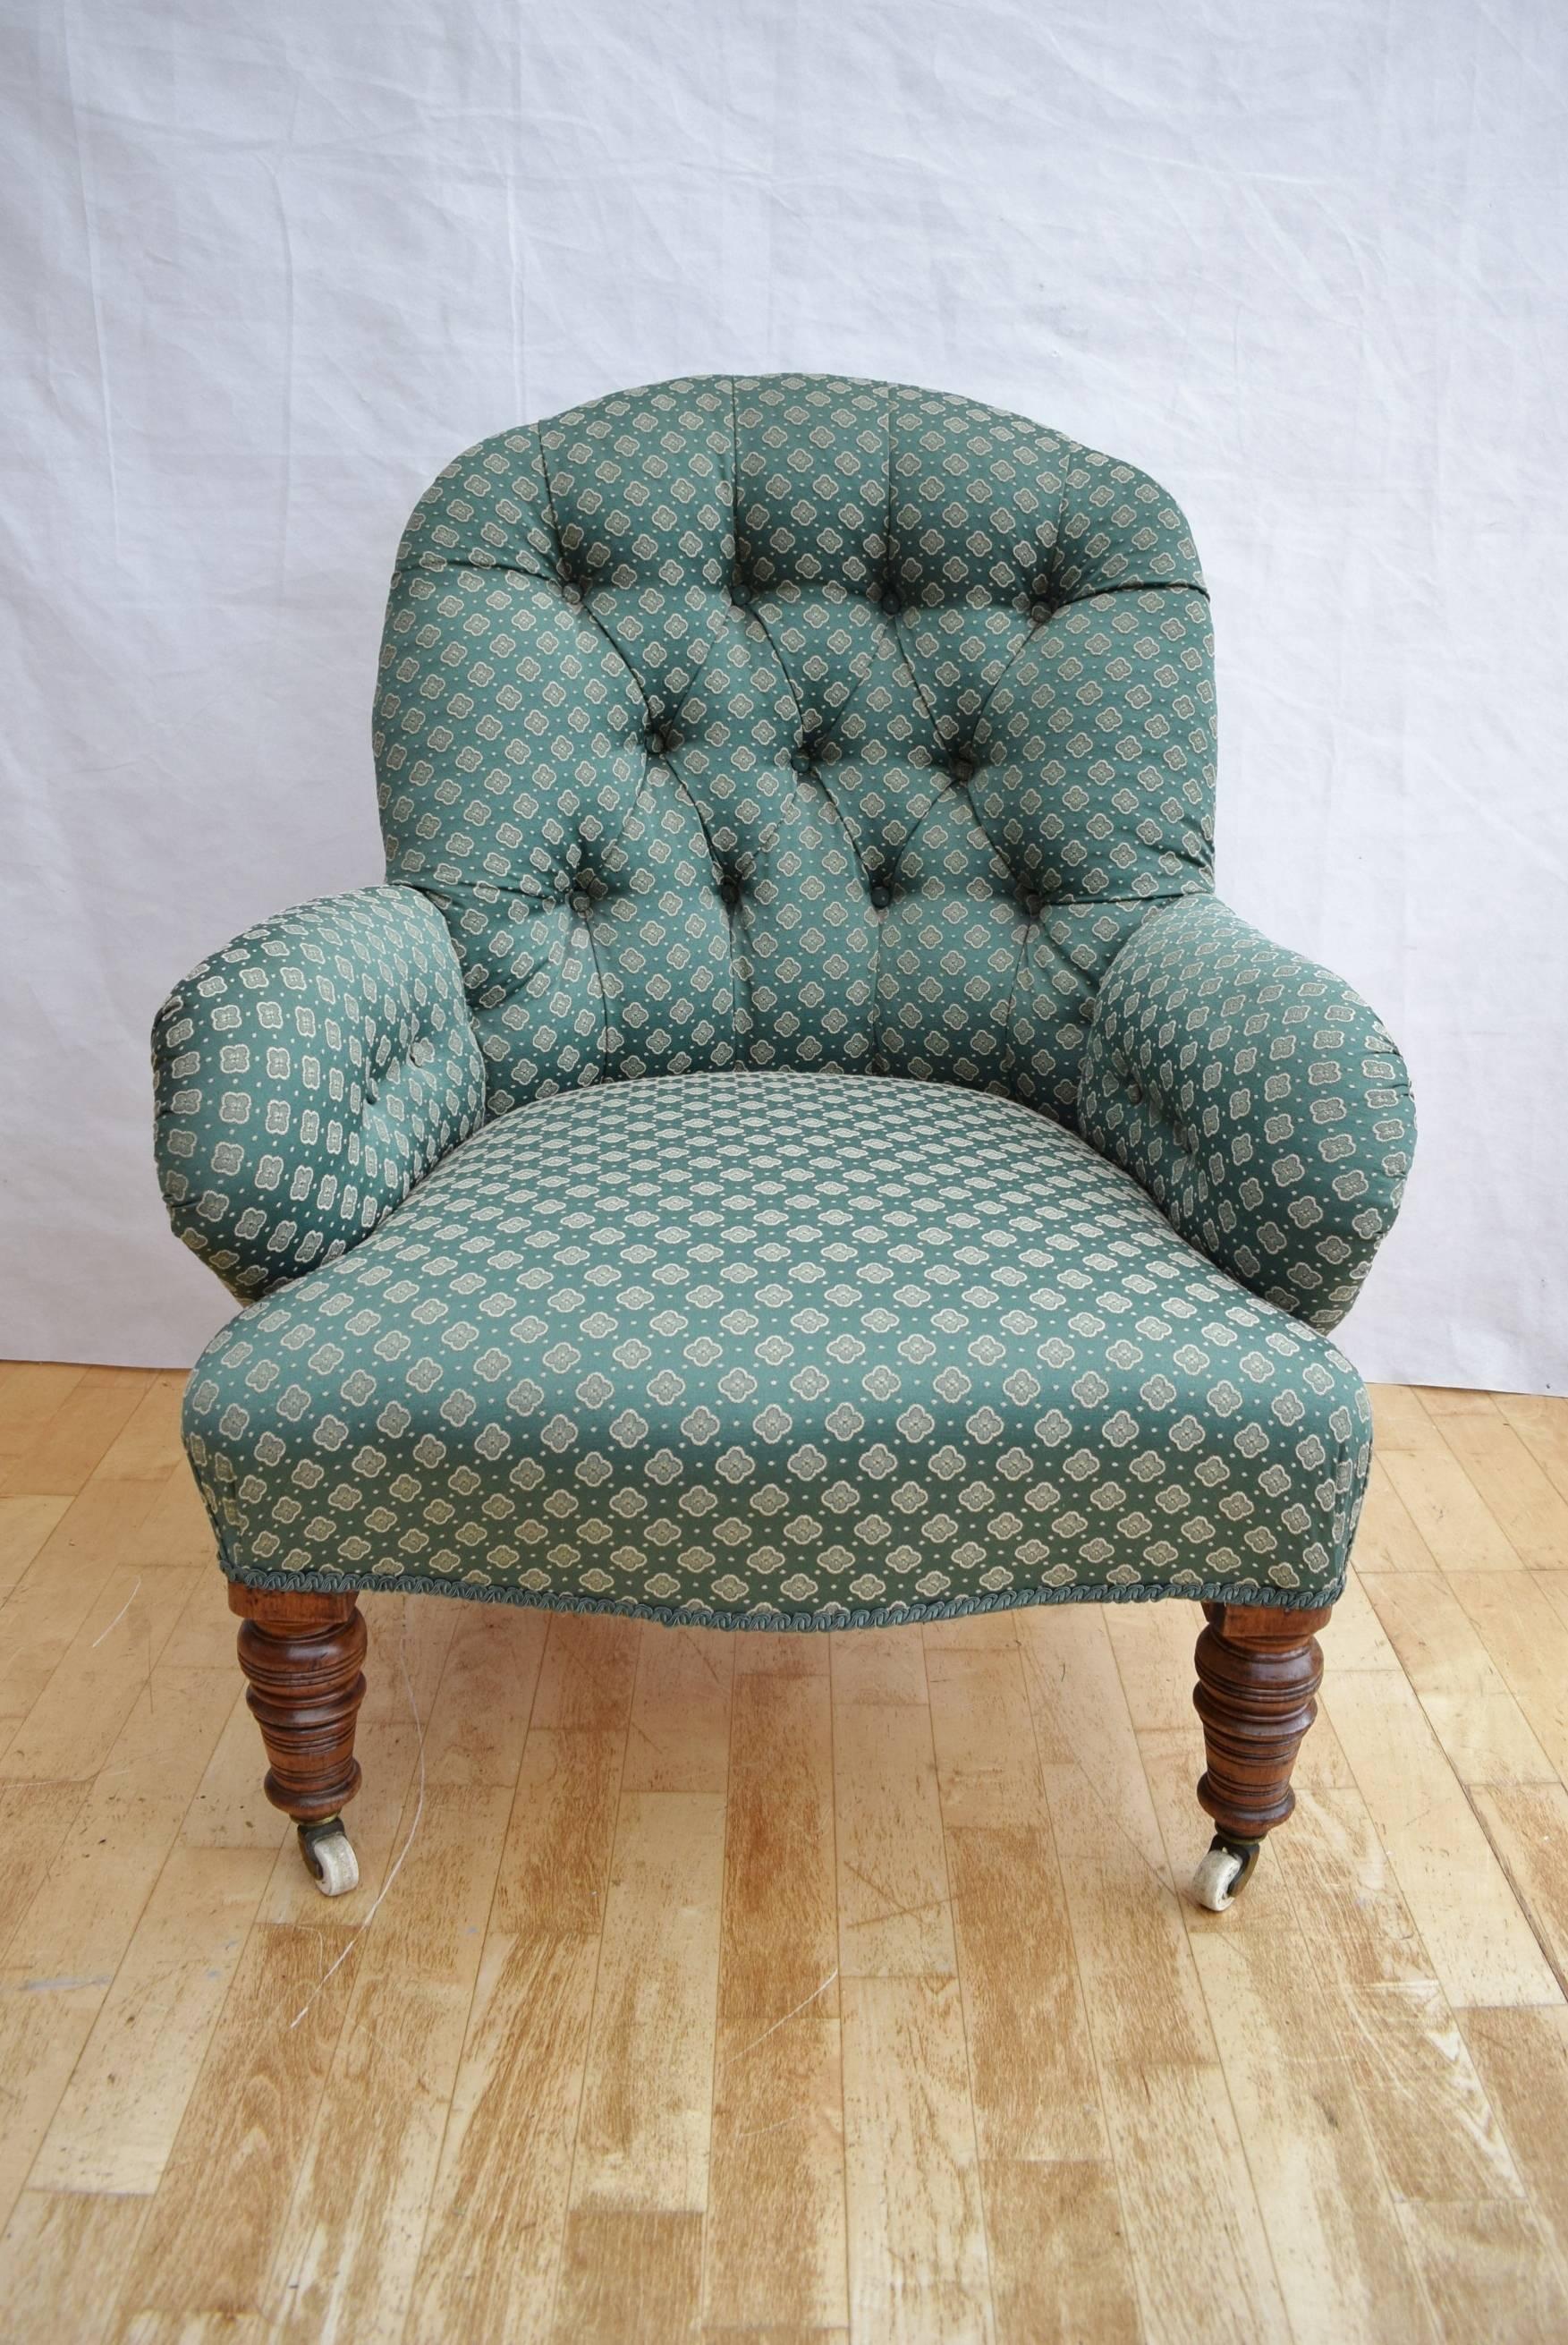 Deeply buttoned and pleated backrest leading to padded webbed and sprung fixed base

The armrests are full upholstered with buttining to the inside

The upholstery is a sea green cotton weave with green braide

The chair is raised upon walnut